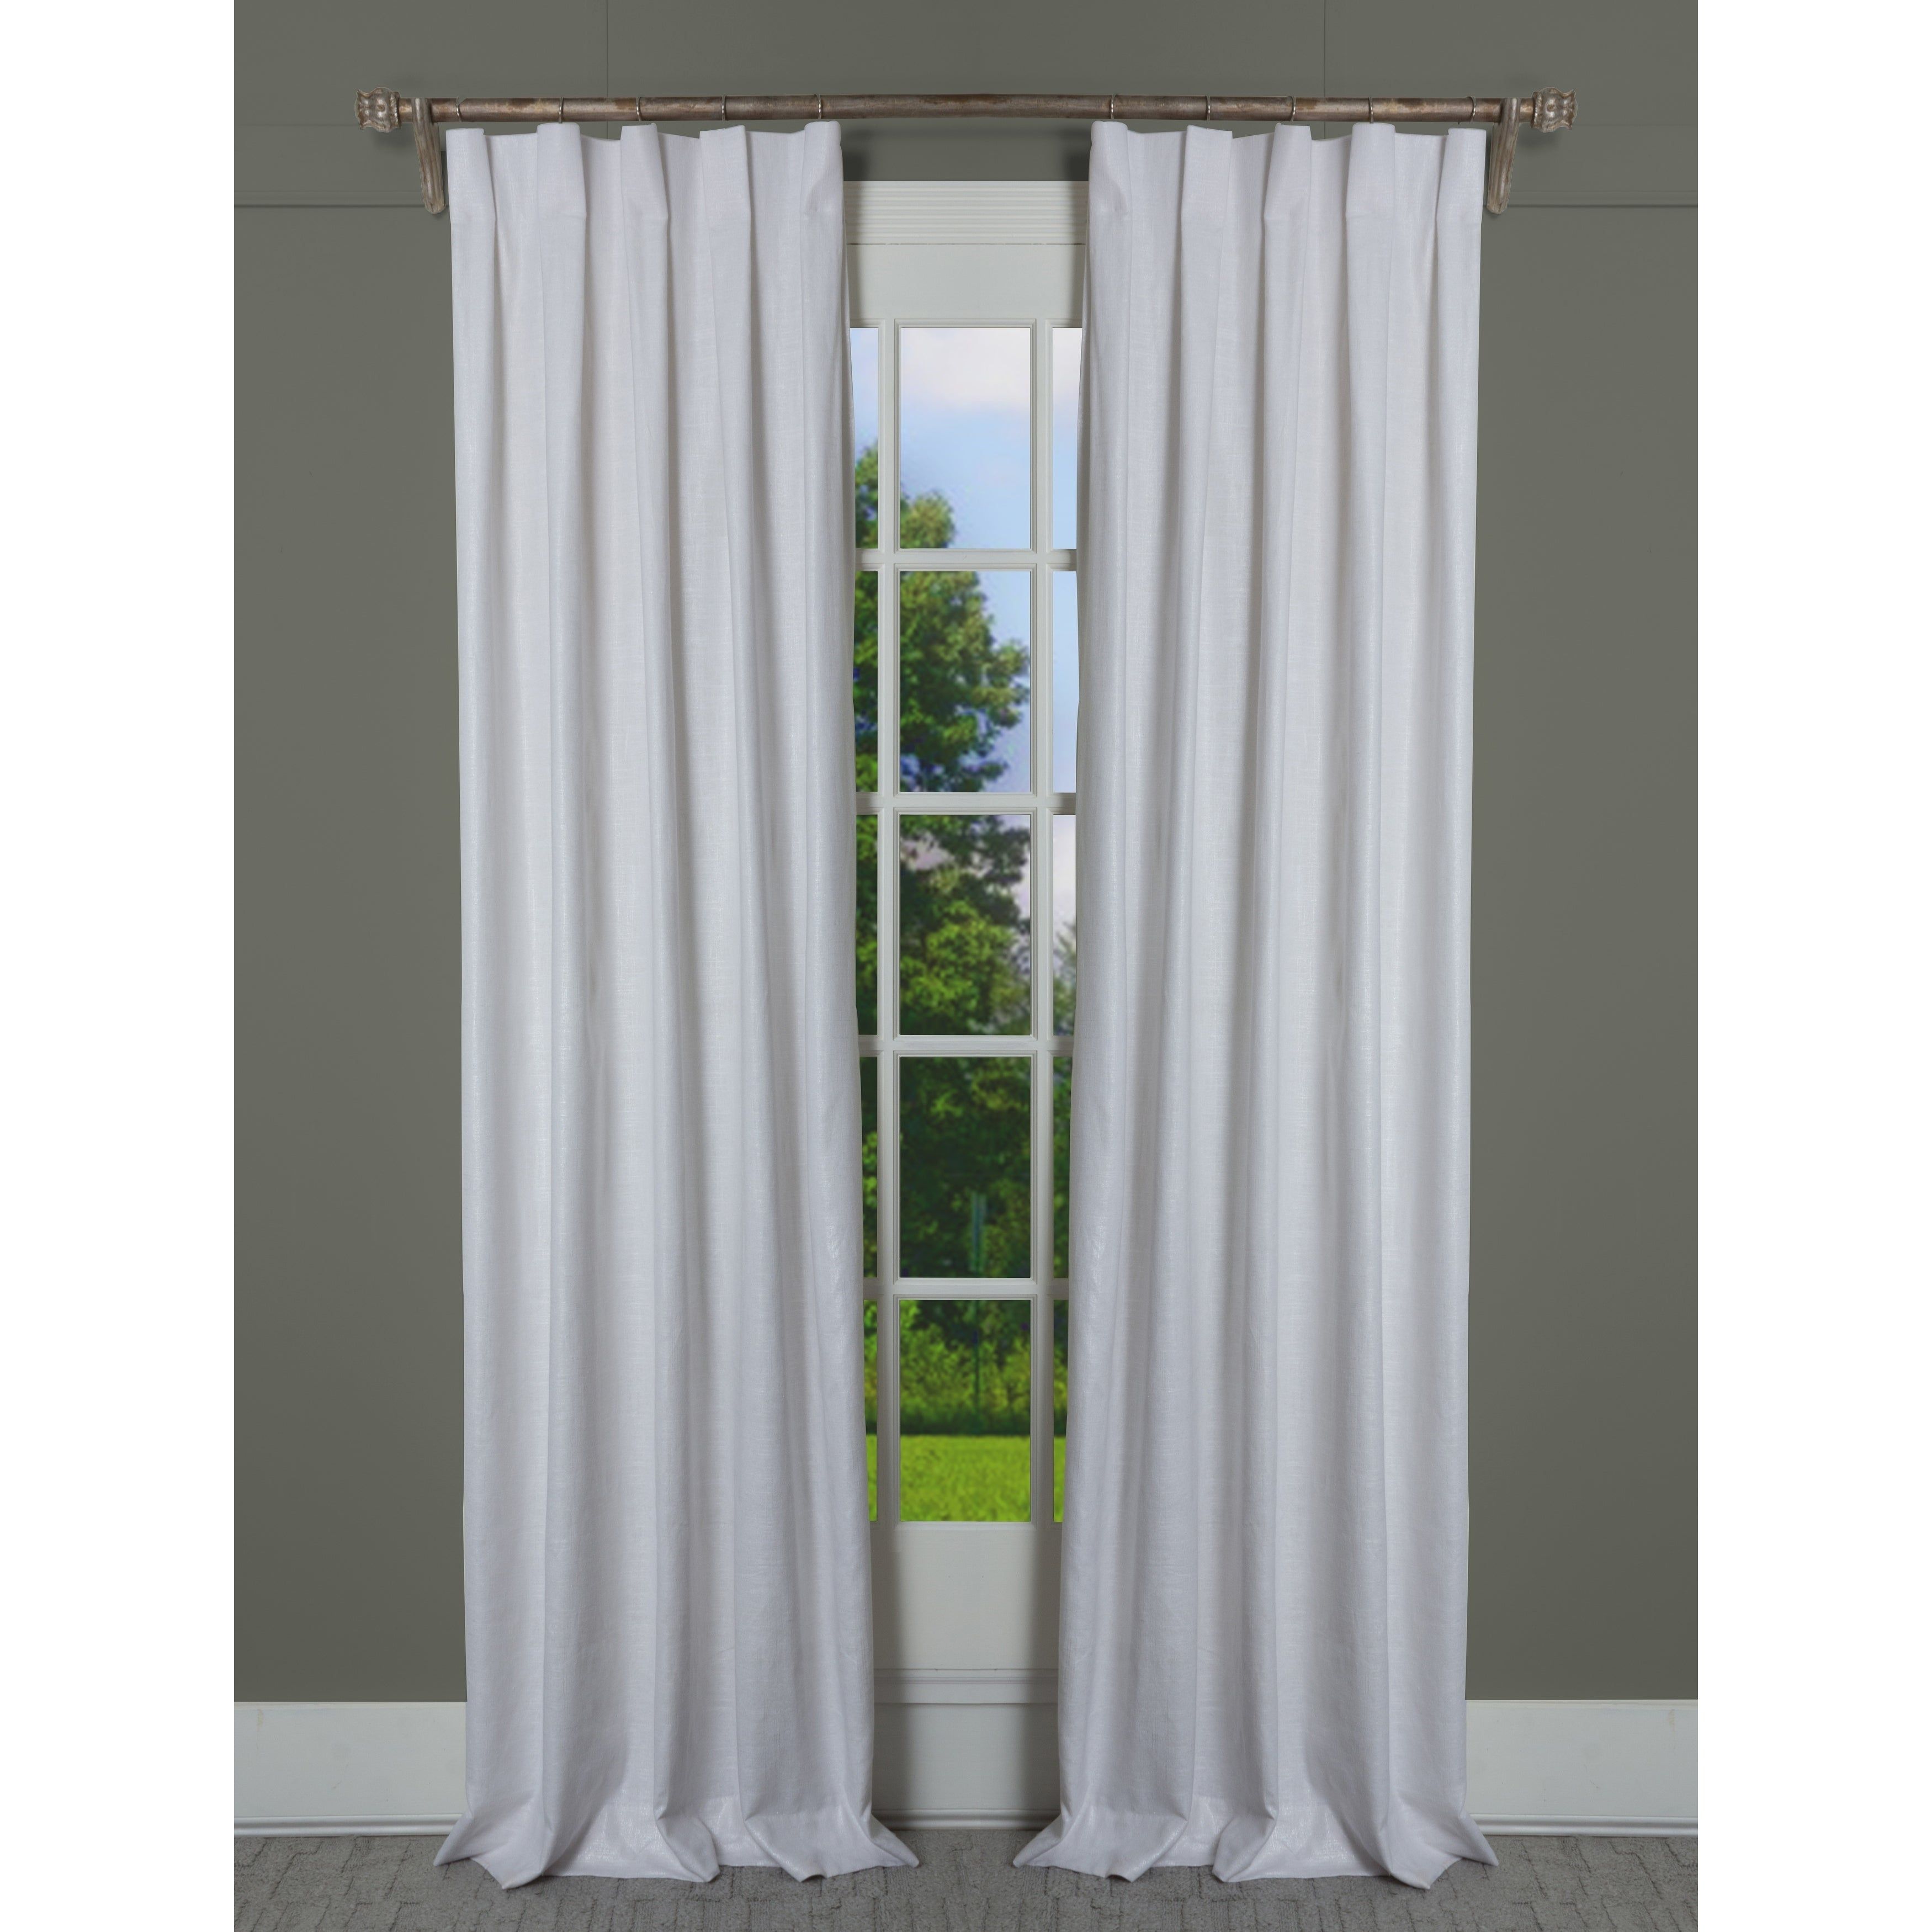 Porch & Den Easystreet Metallic Cotton Box Pleated Single Curtain Panel Regarding Solid Cotton Pleated Curtains (View 8 of 30)